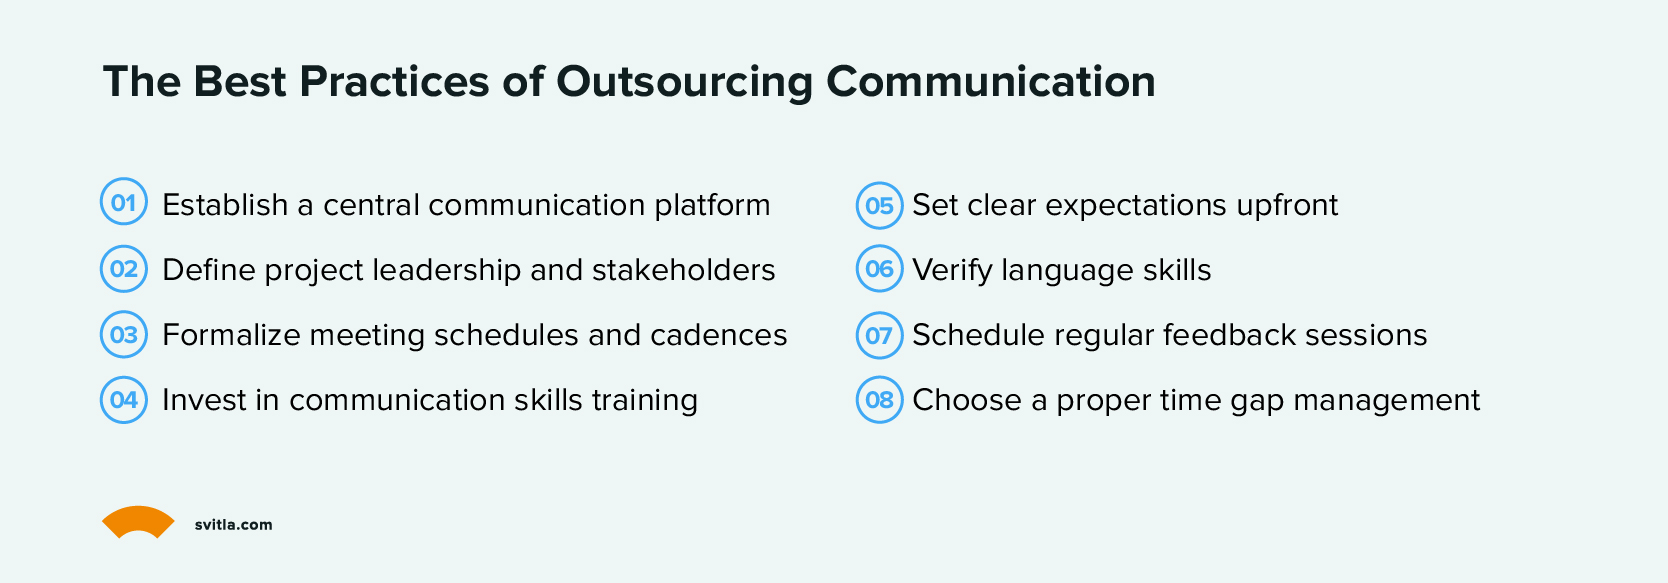 best practices of outsorcing communication